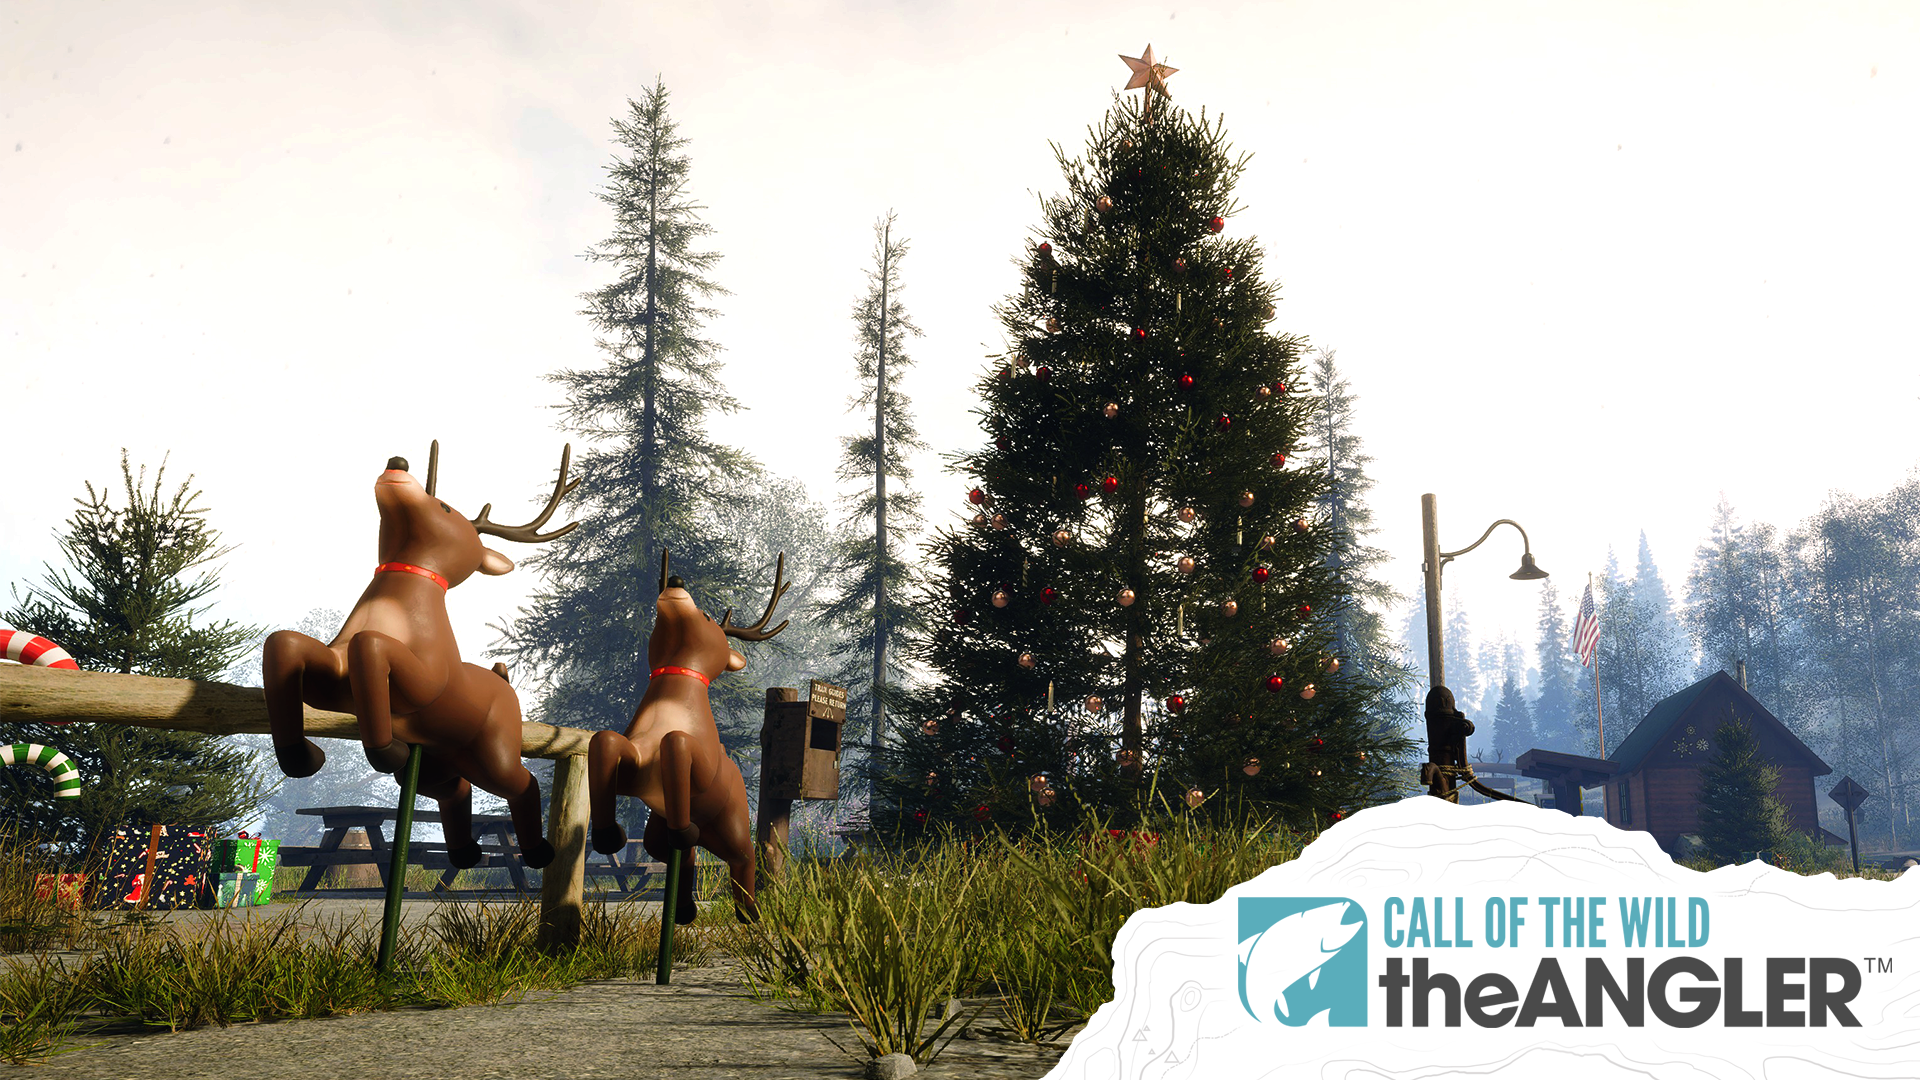 Some festive reindeer, a Christmas tree, and some gifts decorate Golden Ridge Reserve for 2023's Winter Event.